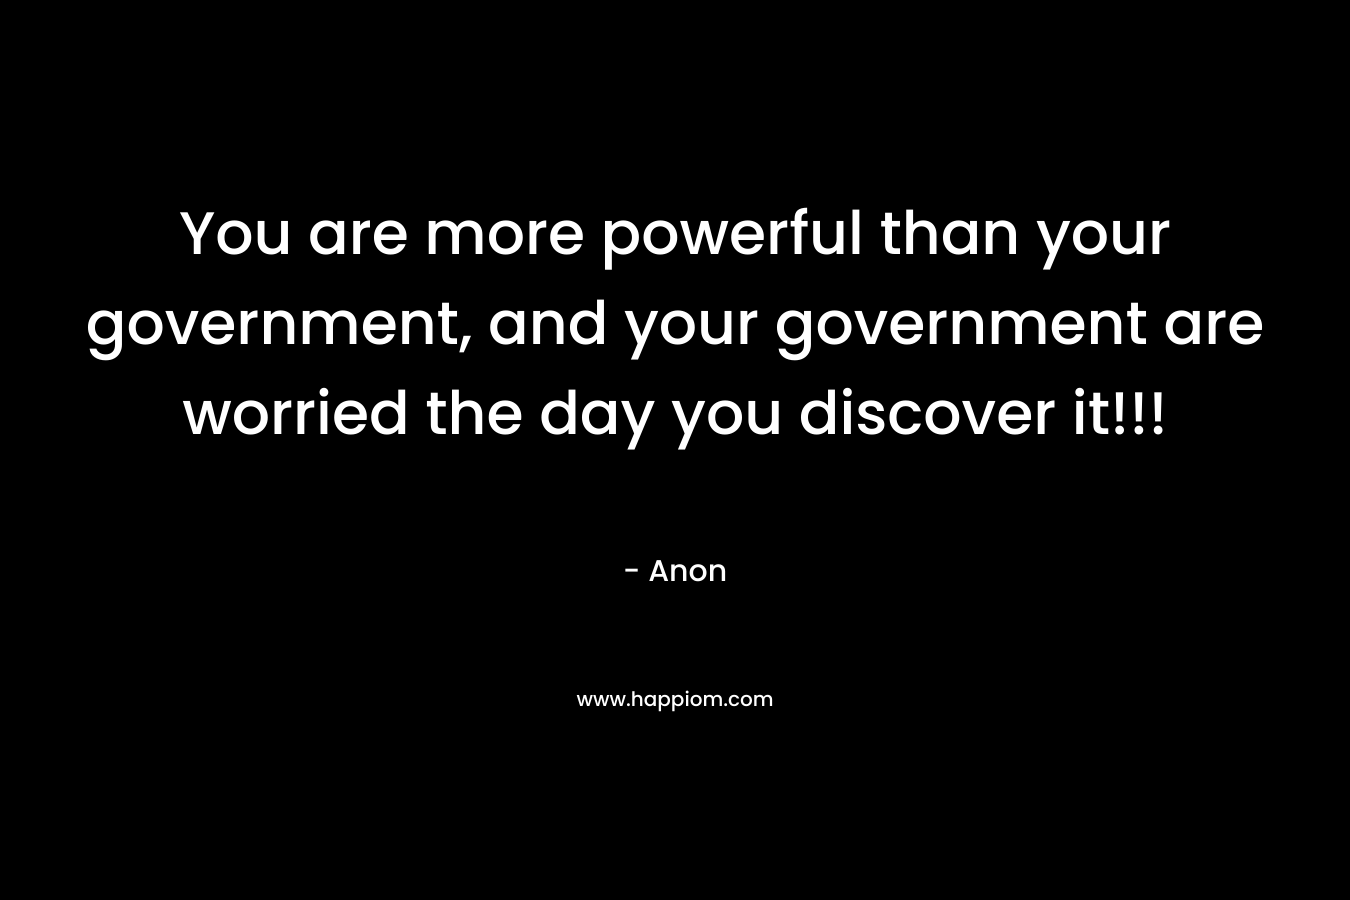 You are more powerful than your government, and your government are worried the day you discover it!!! – Anon